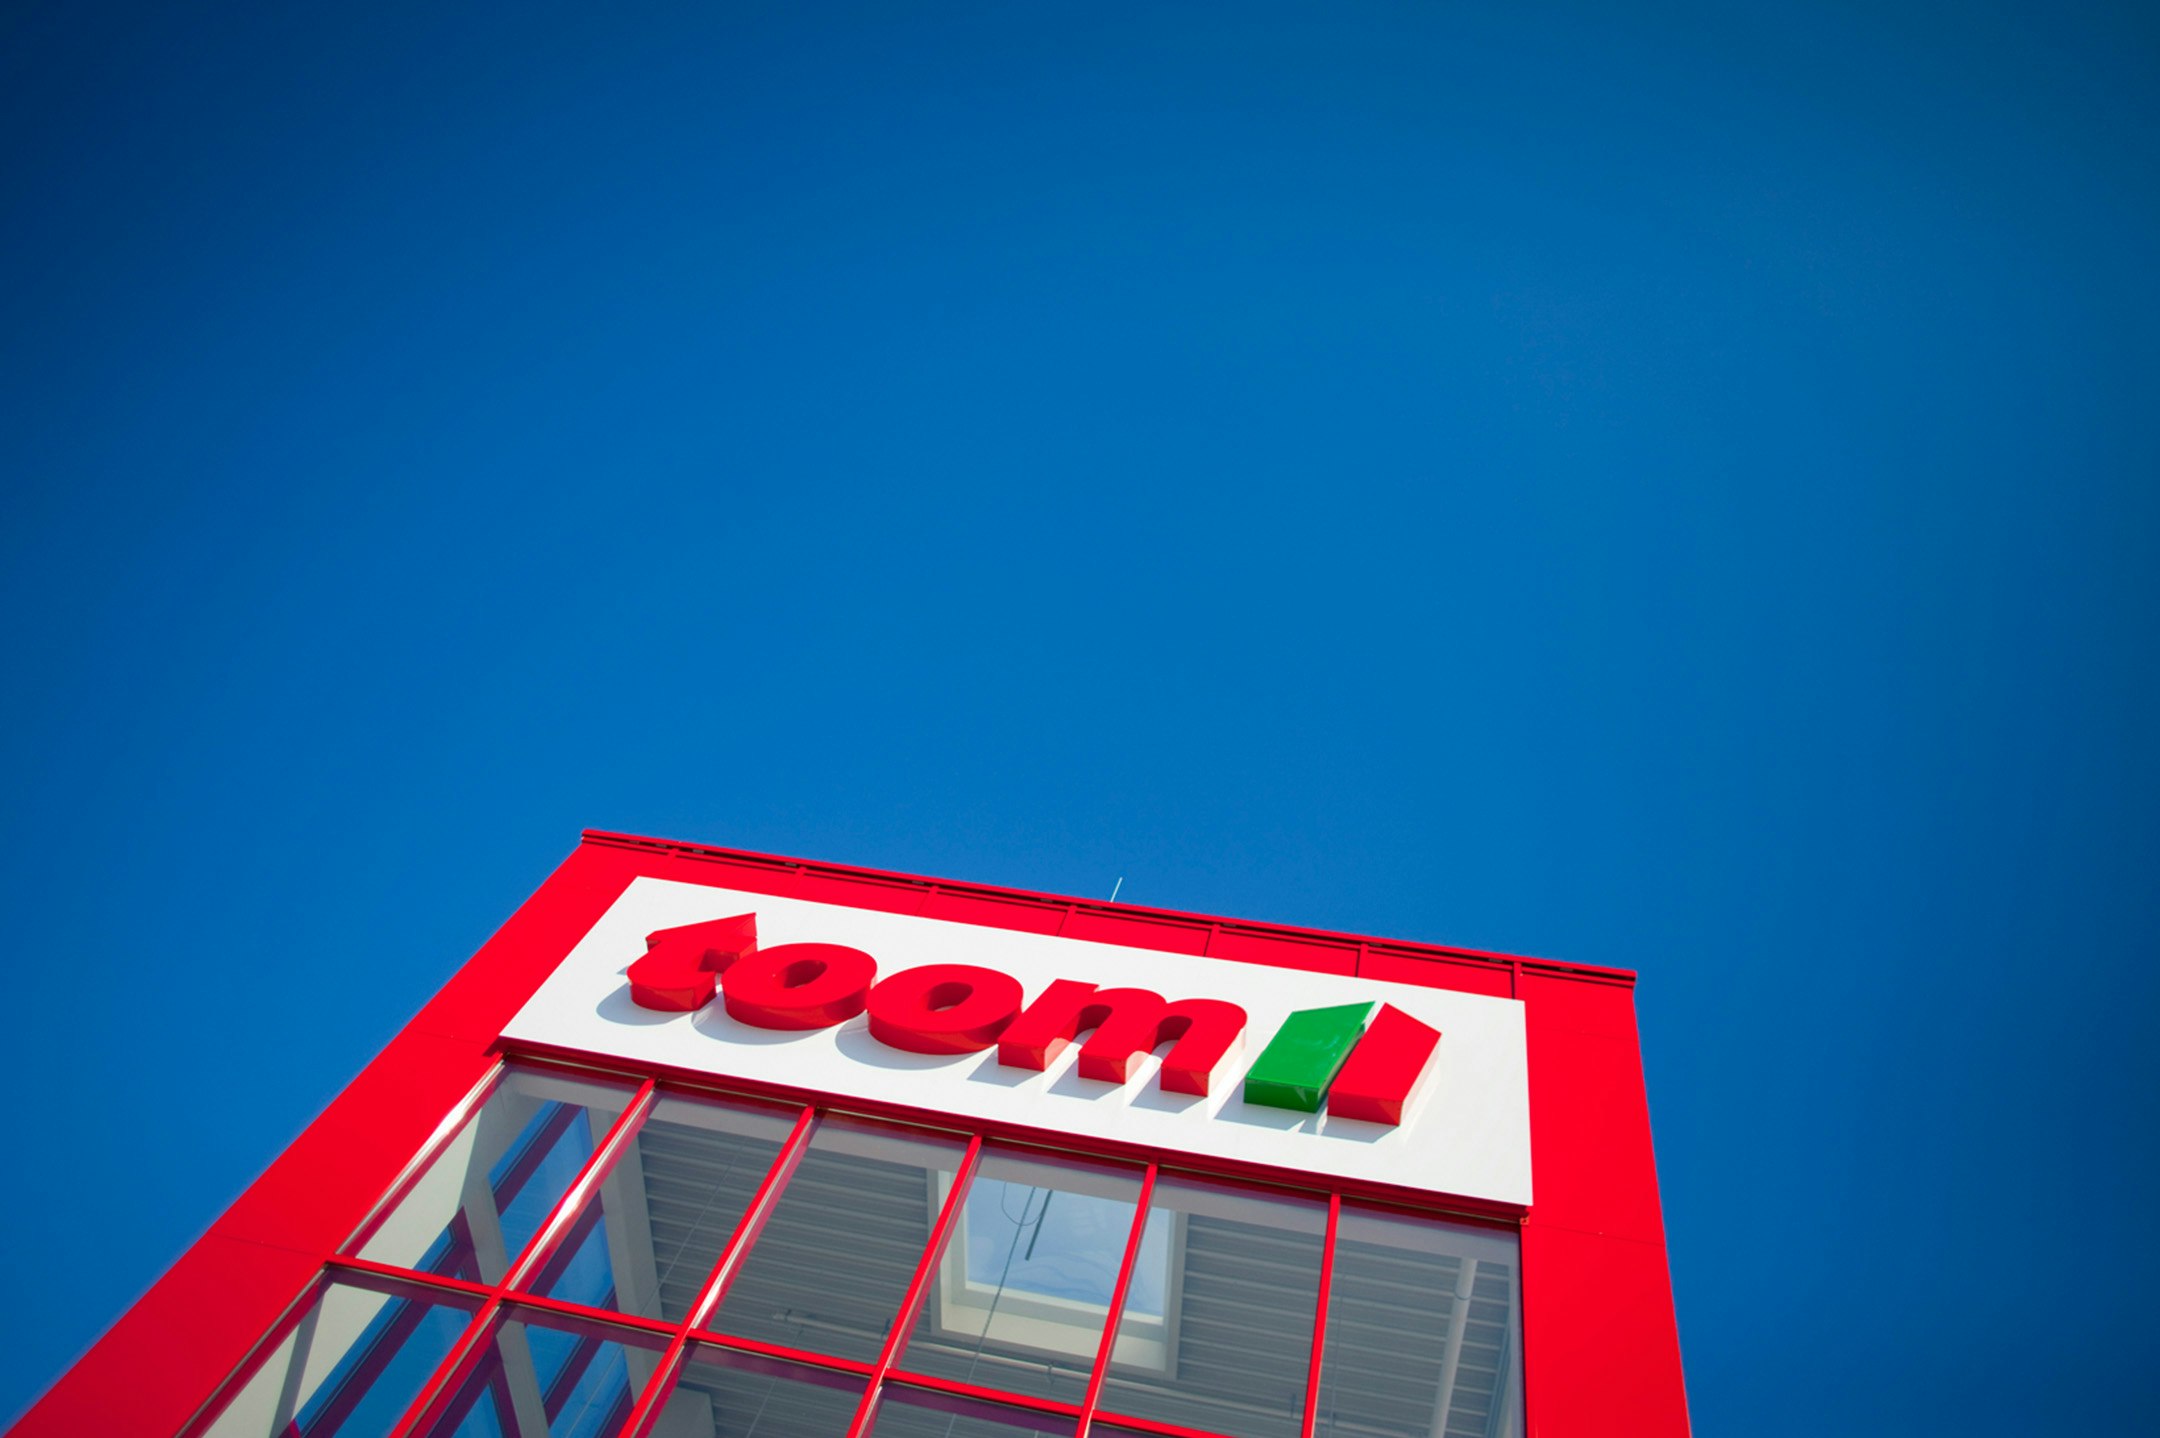 Blue sky and red toom building with logo